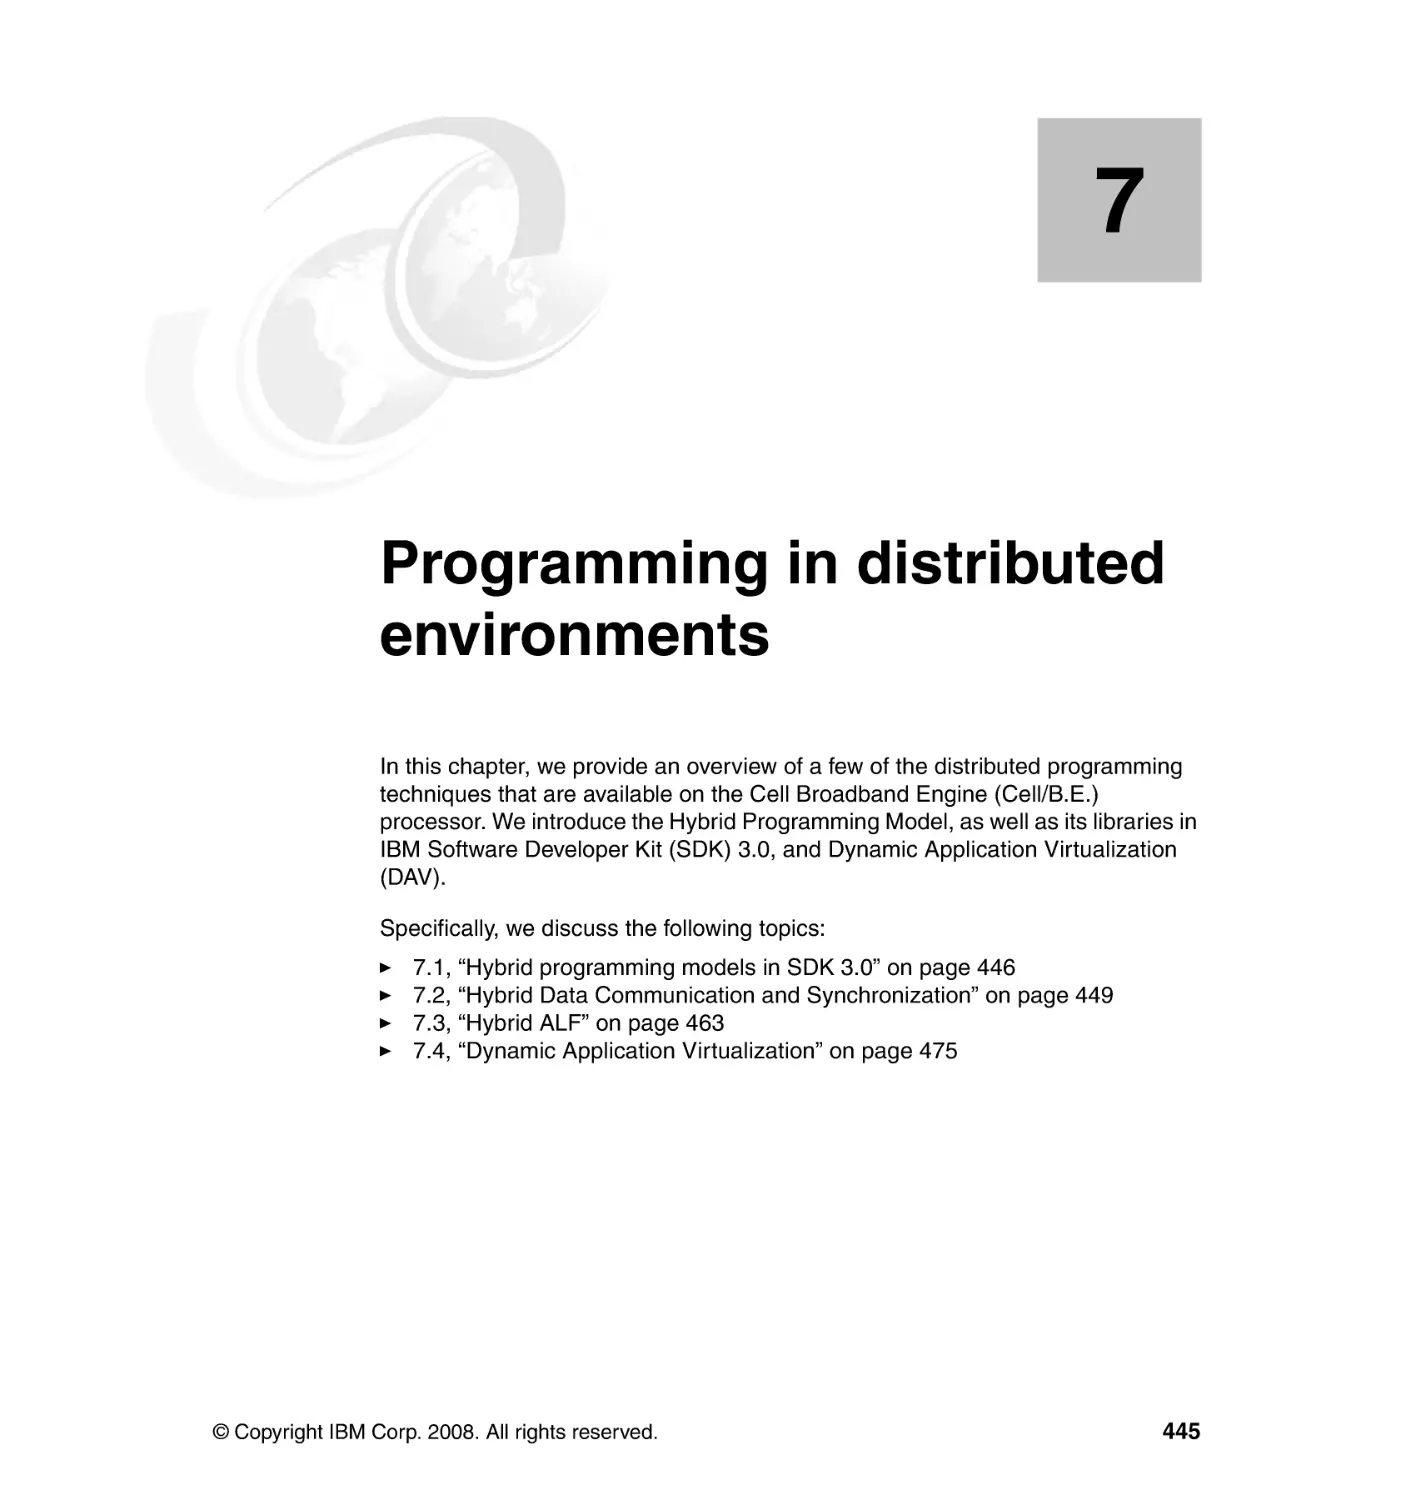 Chapter 7. Programming in distributed environments